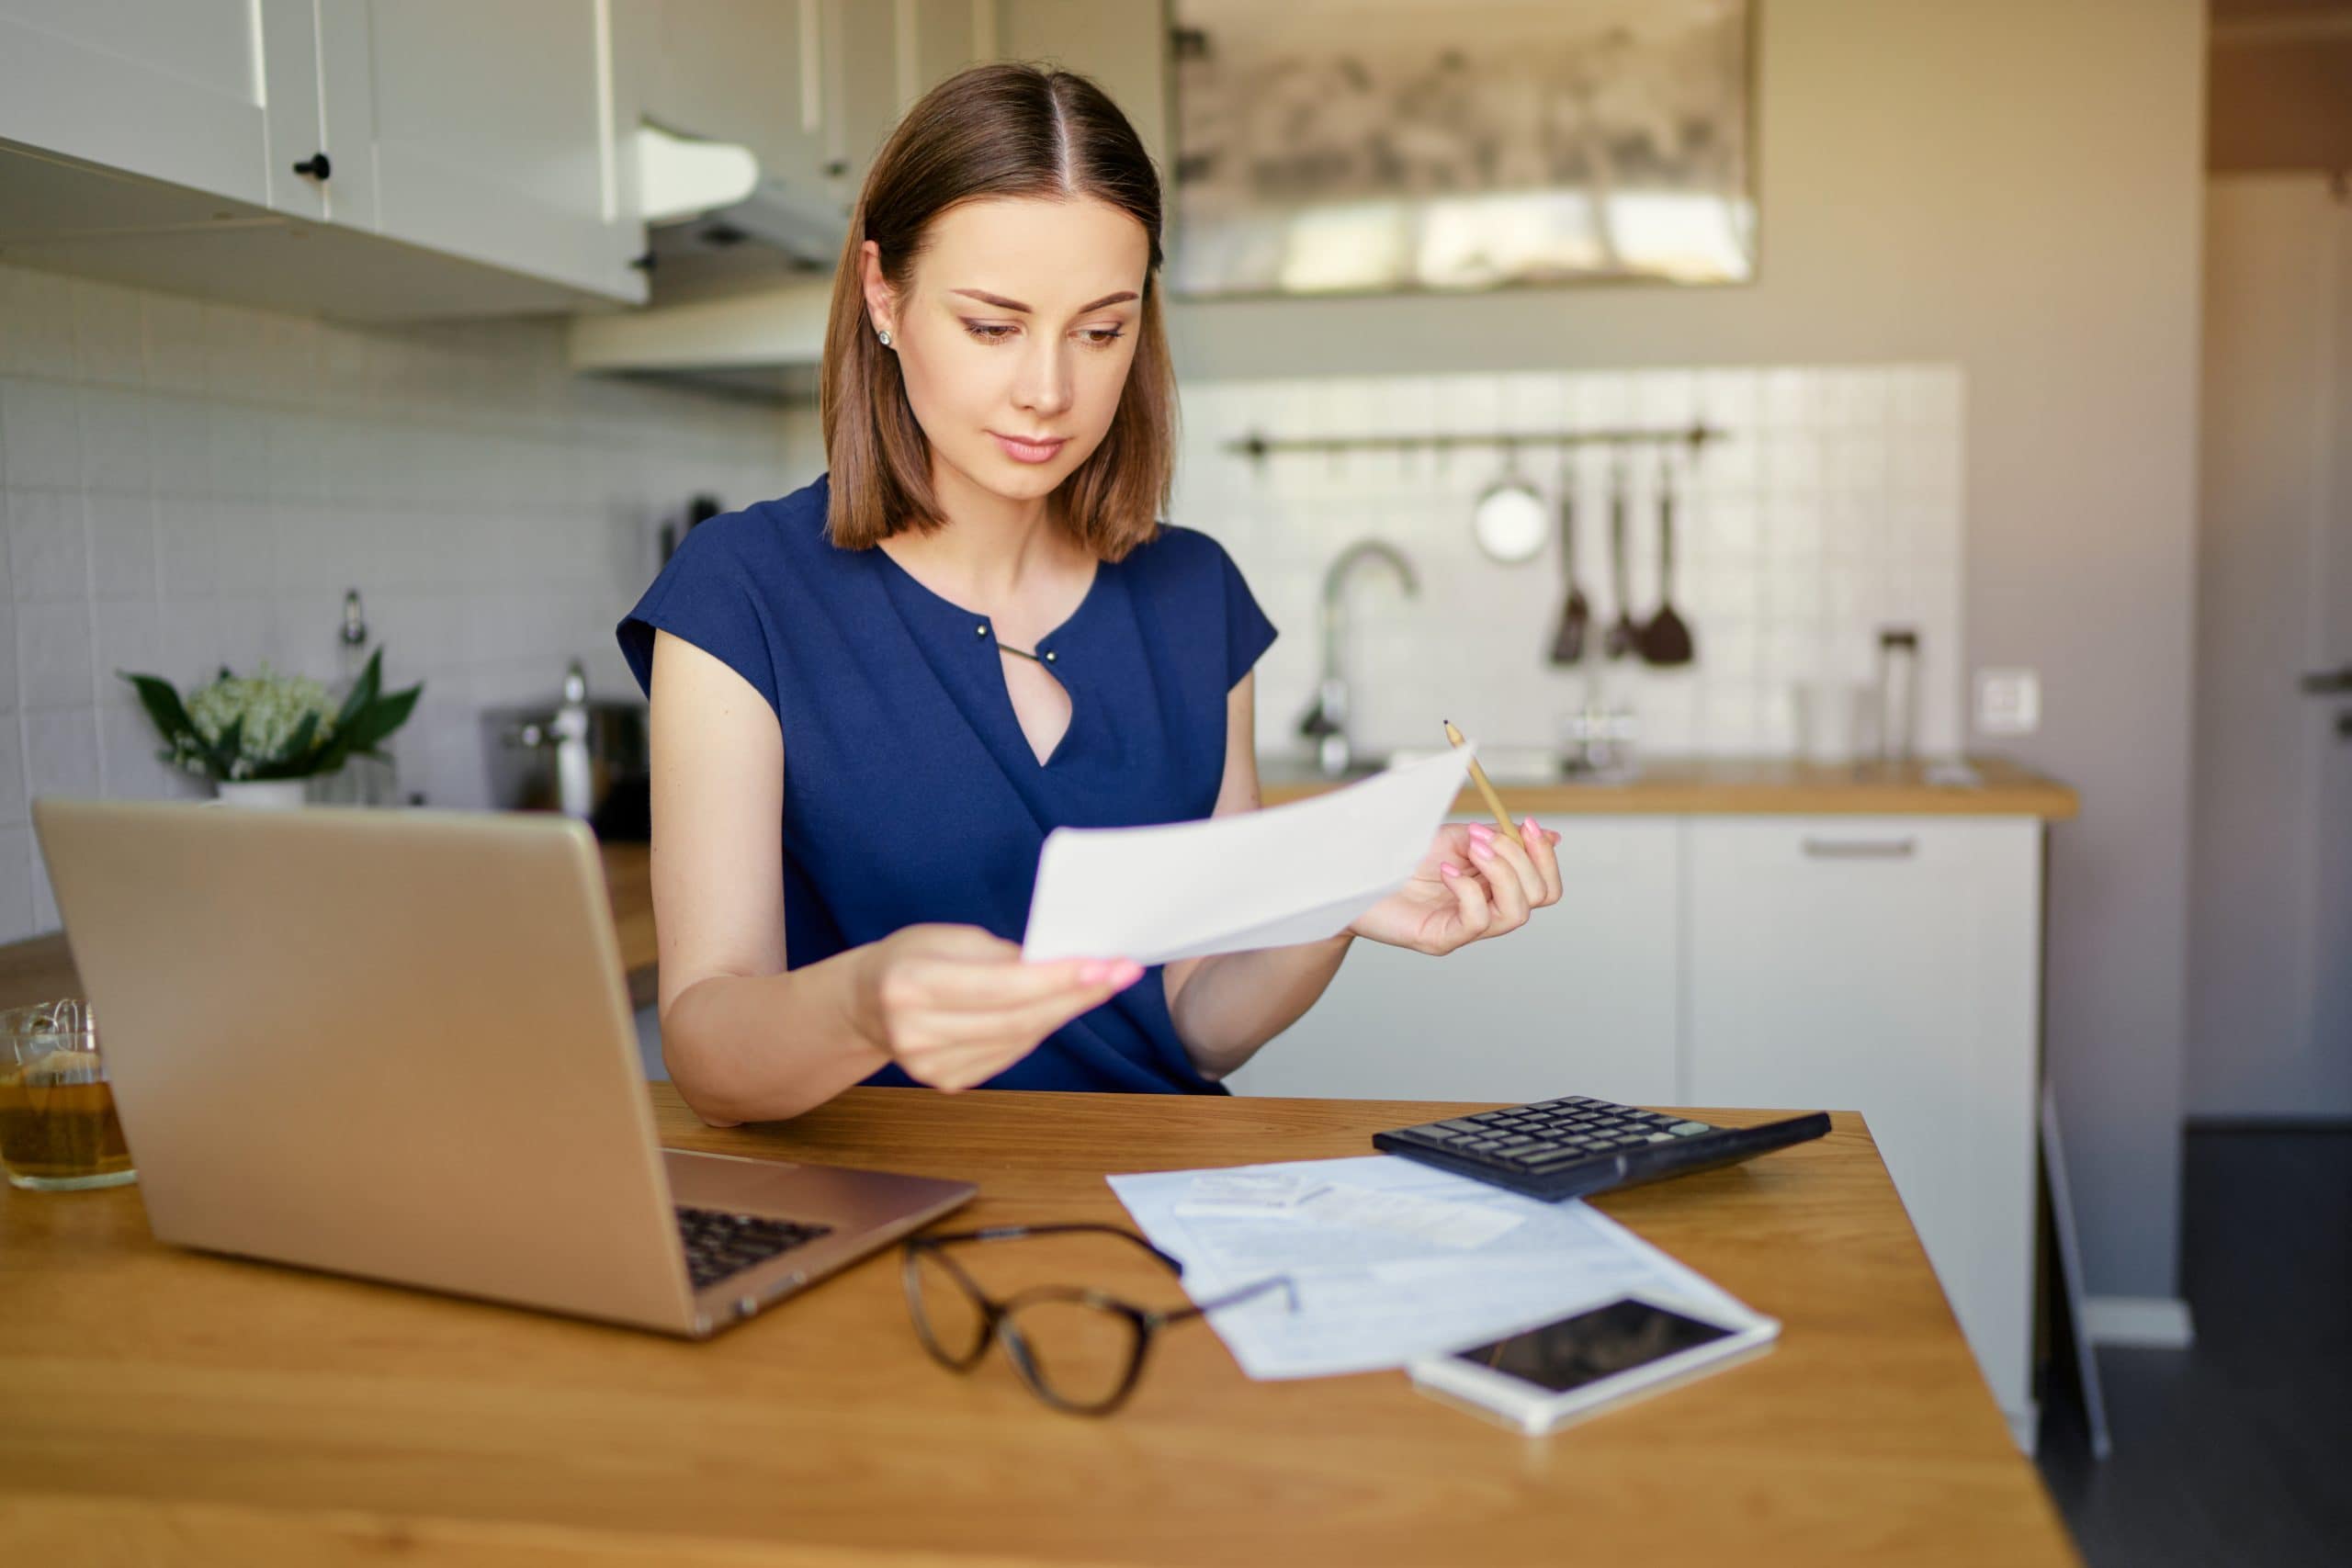 Check Your CSA Income Estimate. Accompanying image: thoughtful young woman using a laptop computer sitting at her kitchen holding utility bill and bank statements.